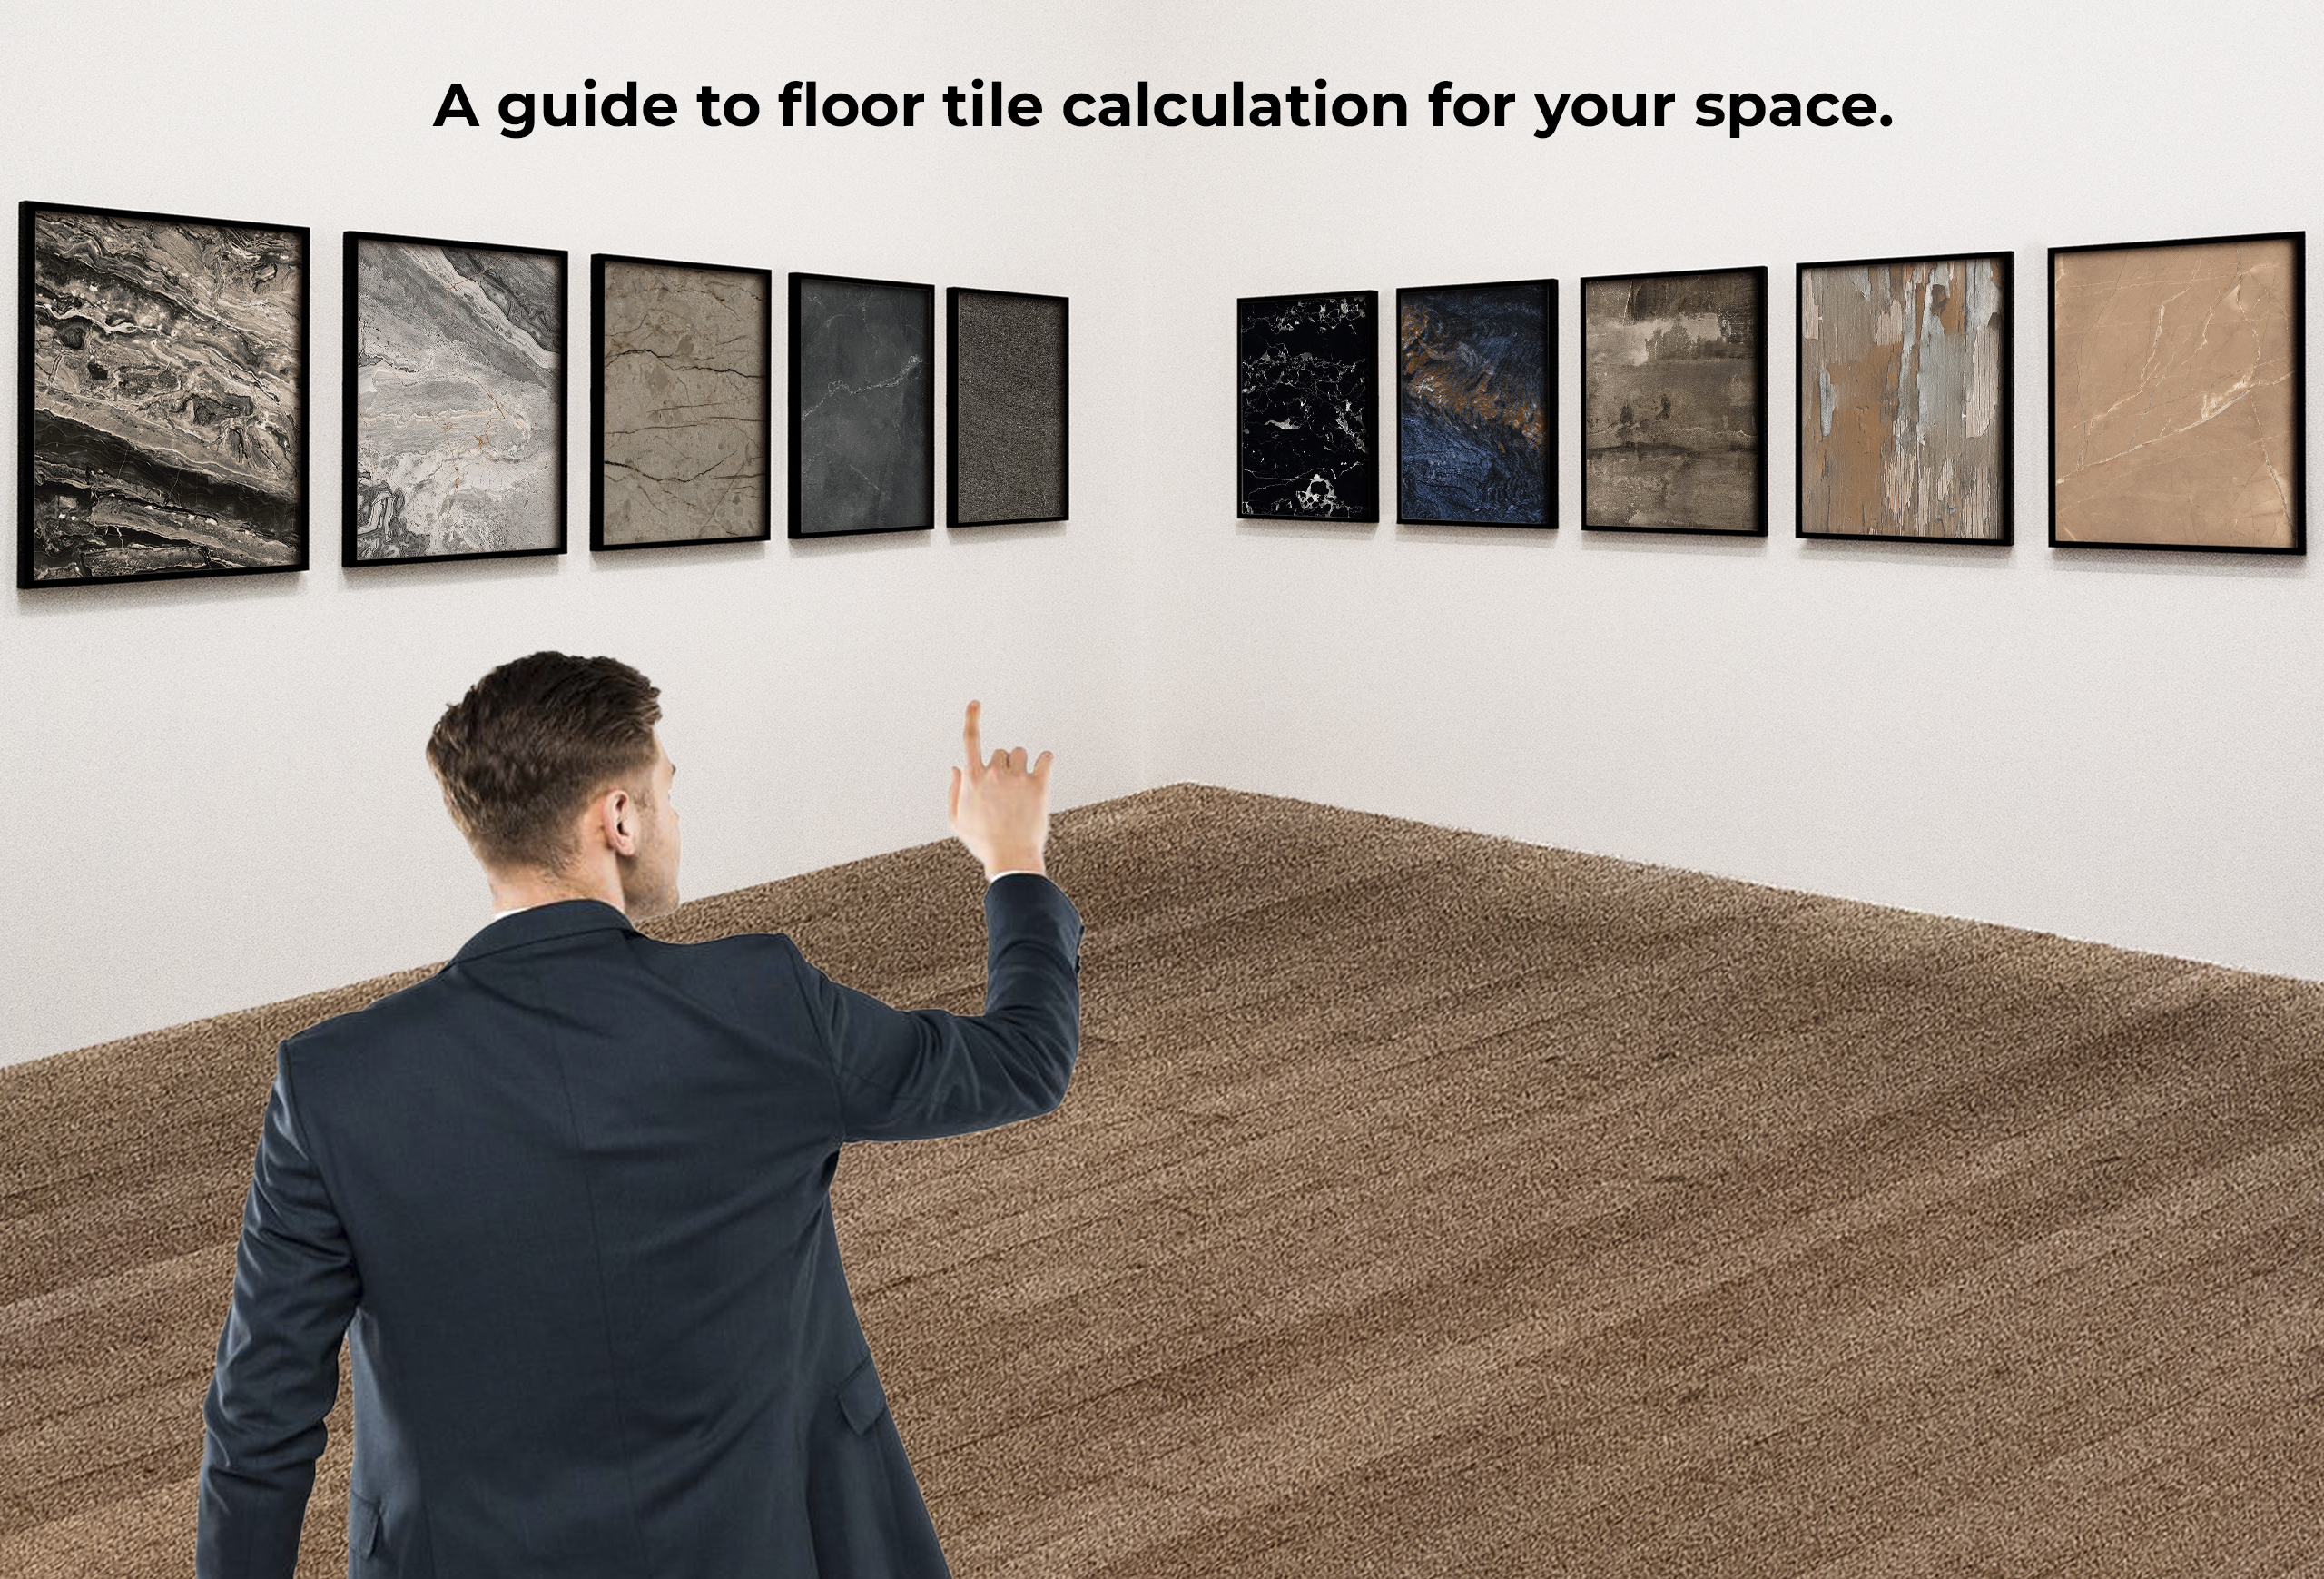 A guide to floor tile calculation for your space